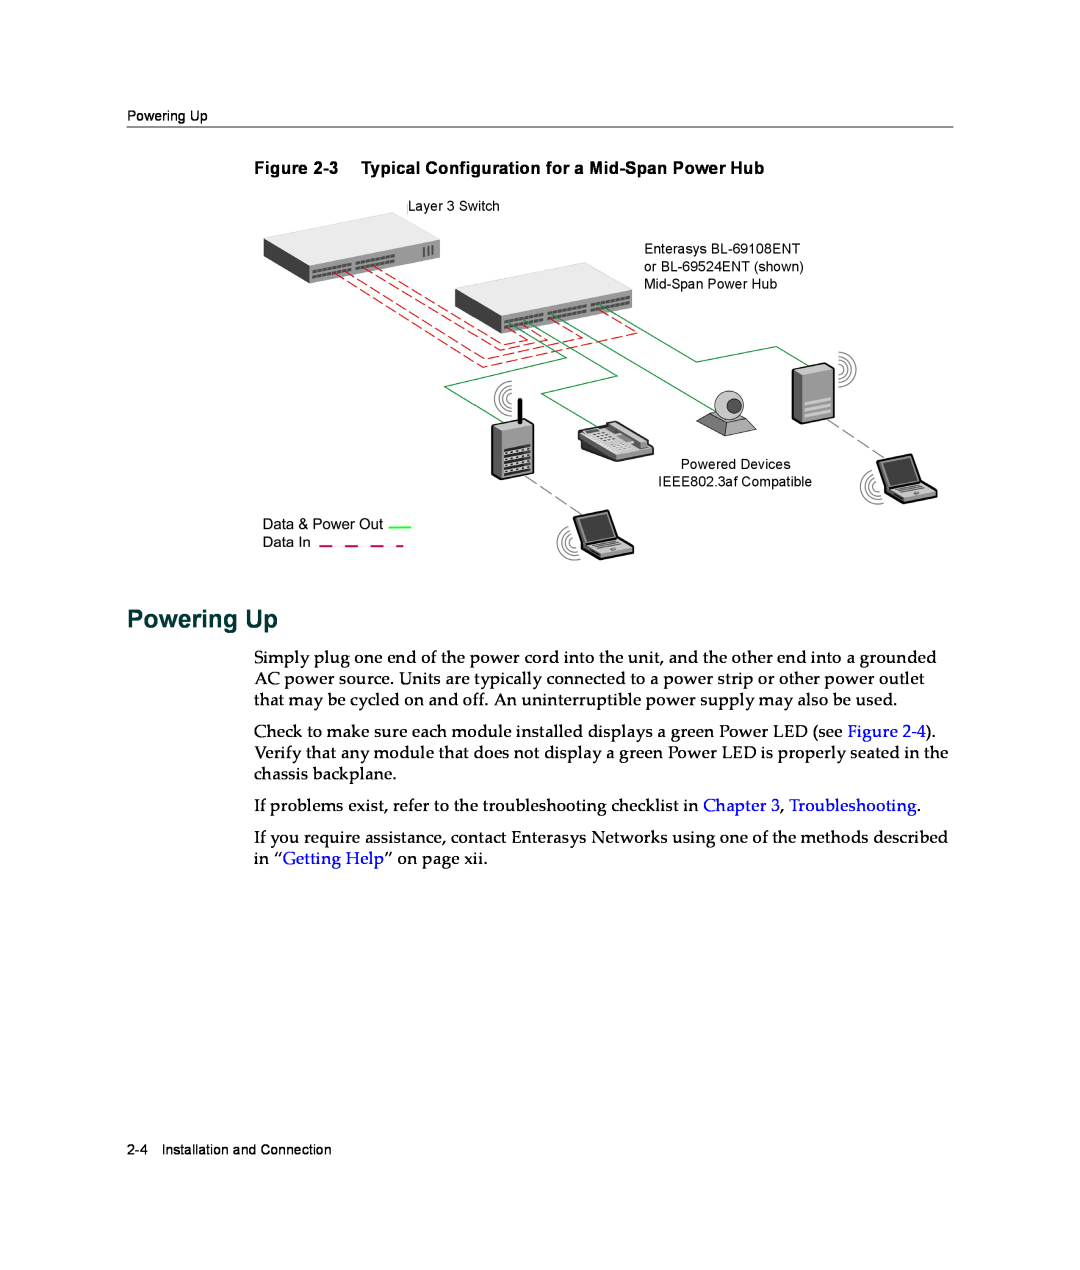 Enterasys Networks BL-6000ENT manual Powering Up, 3 Typical Configuration for a Mid-Span Power Hub 